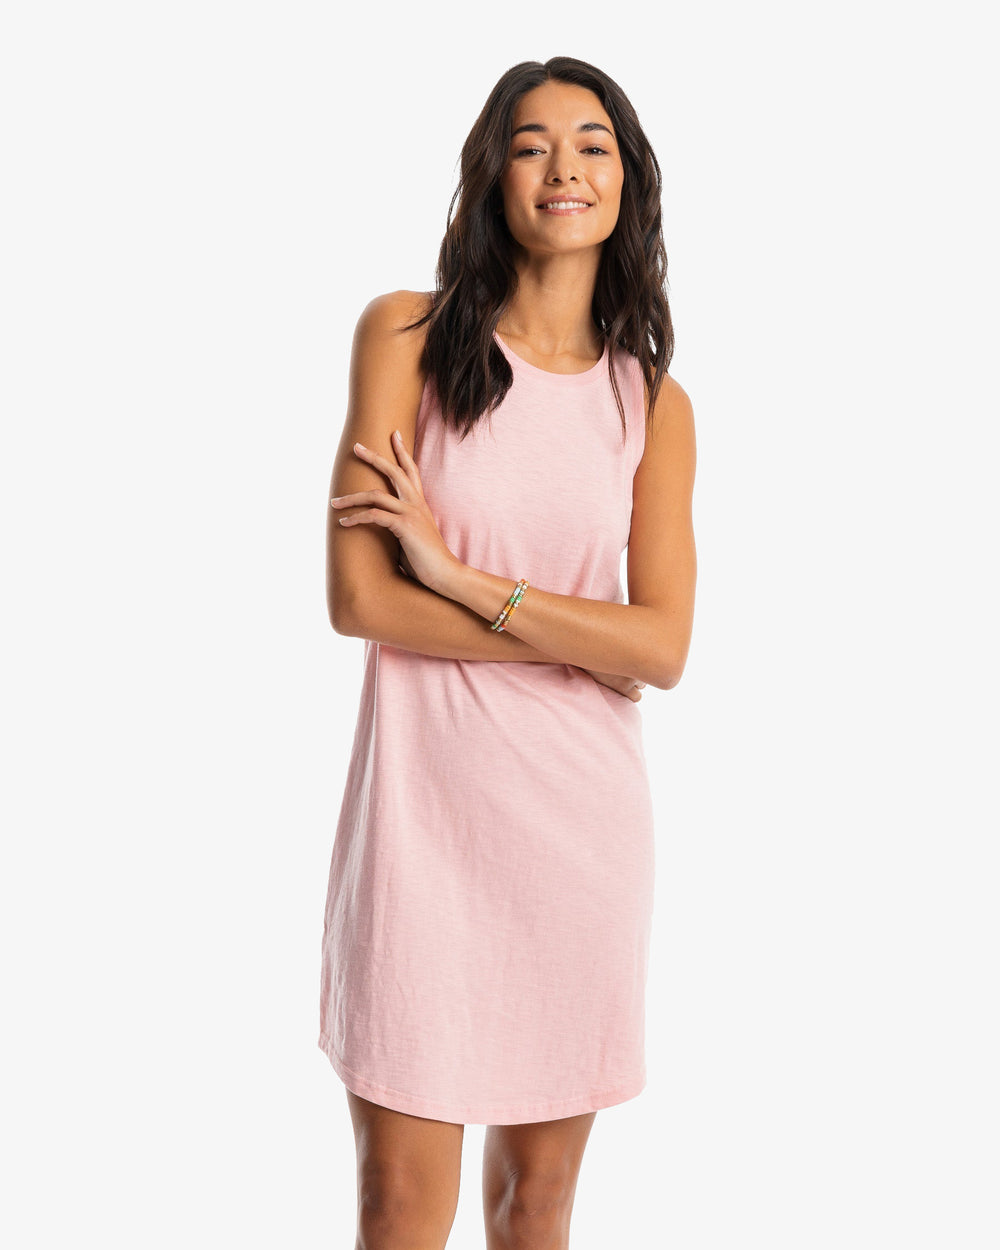 The model front view of the Women's Portia Sun Farer Sleeveless Dress by Southern Tide - Quartz Pink